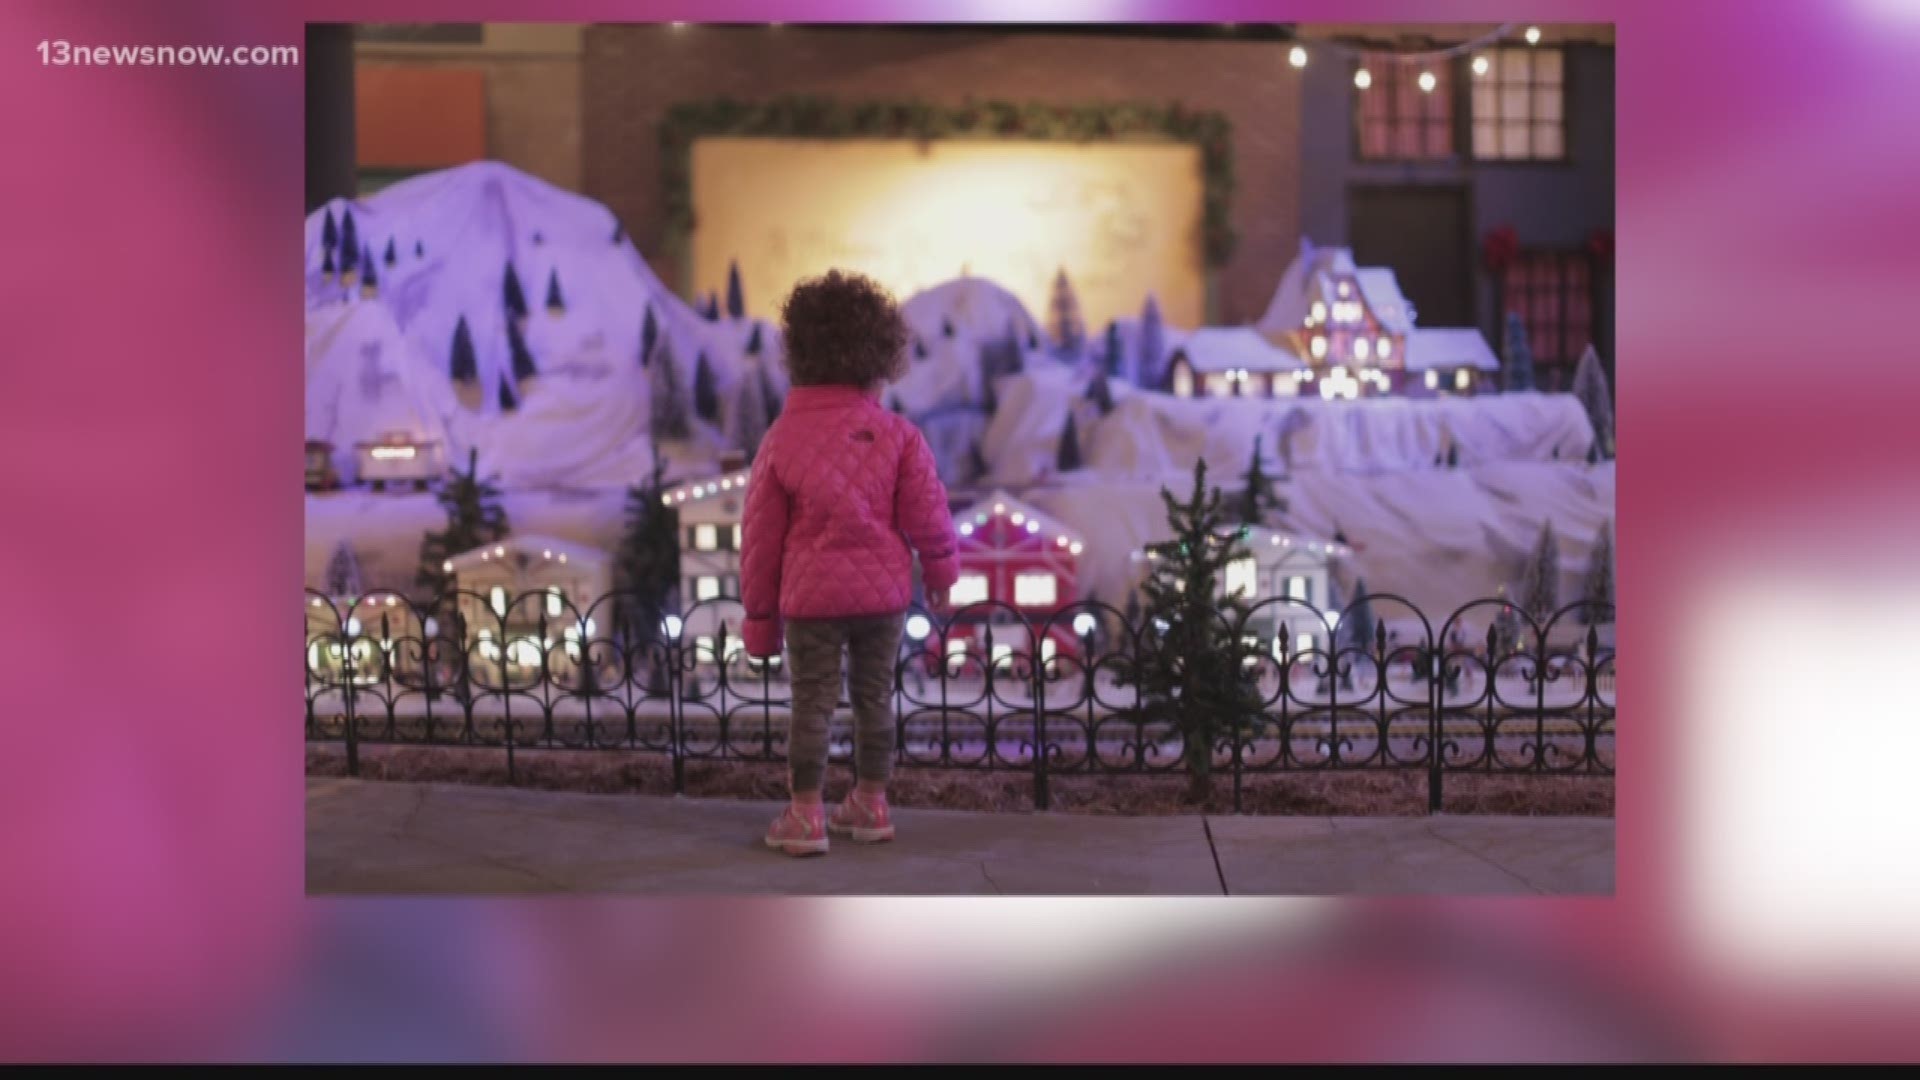 The holiday village sits in the Decker Half Moone Center, where visitors can walk and enjoy strolling carolers, and photos with Father Christmas.